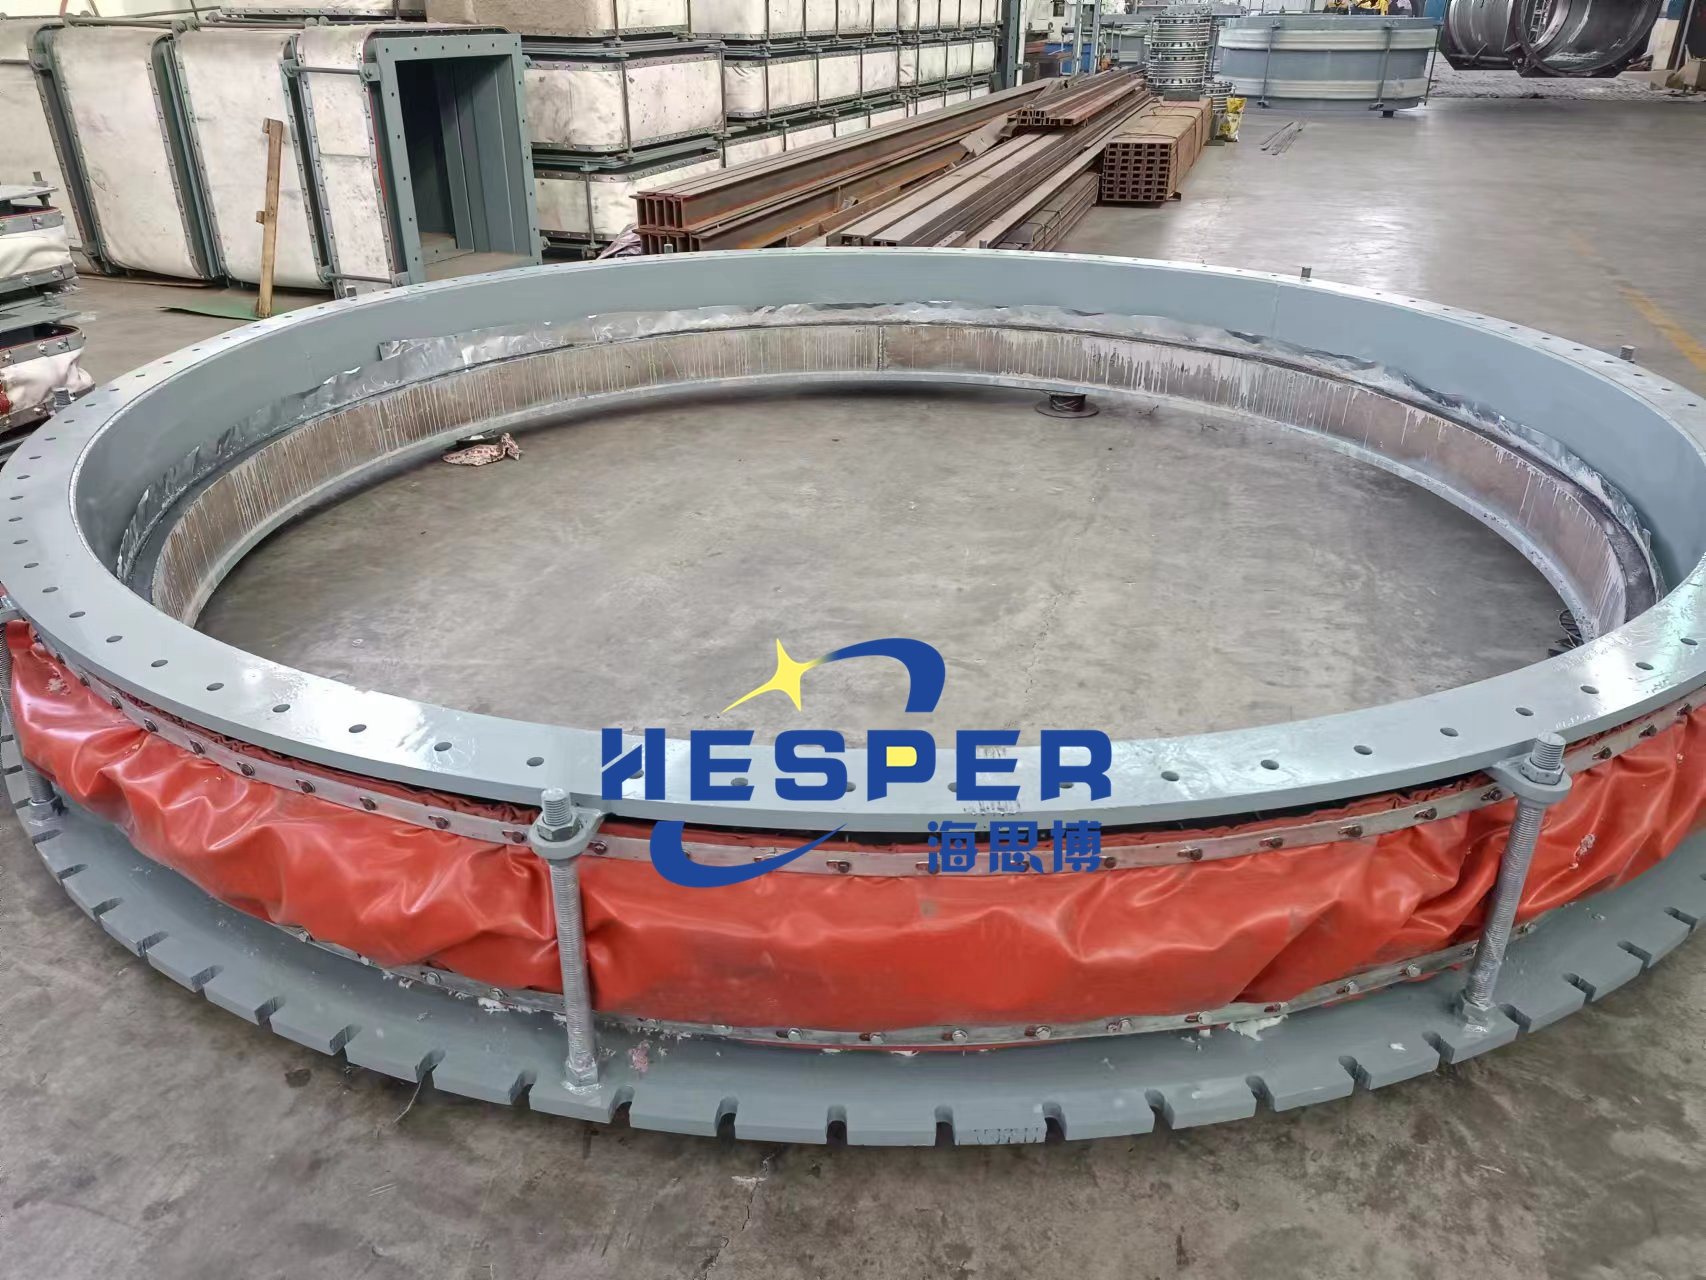 Features and applications of Hesper fabric expansion joints